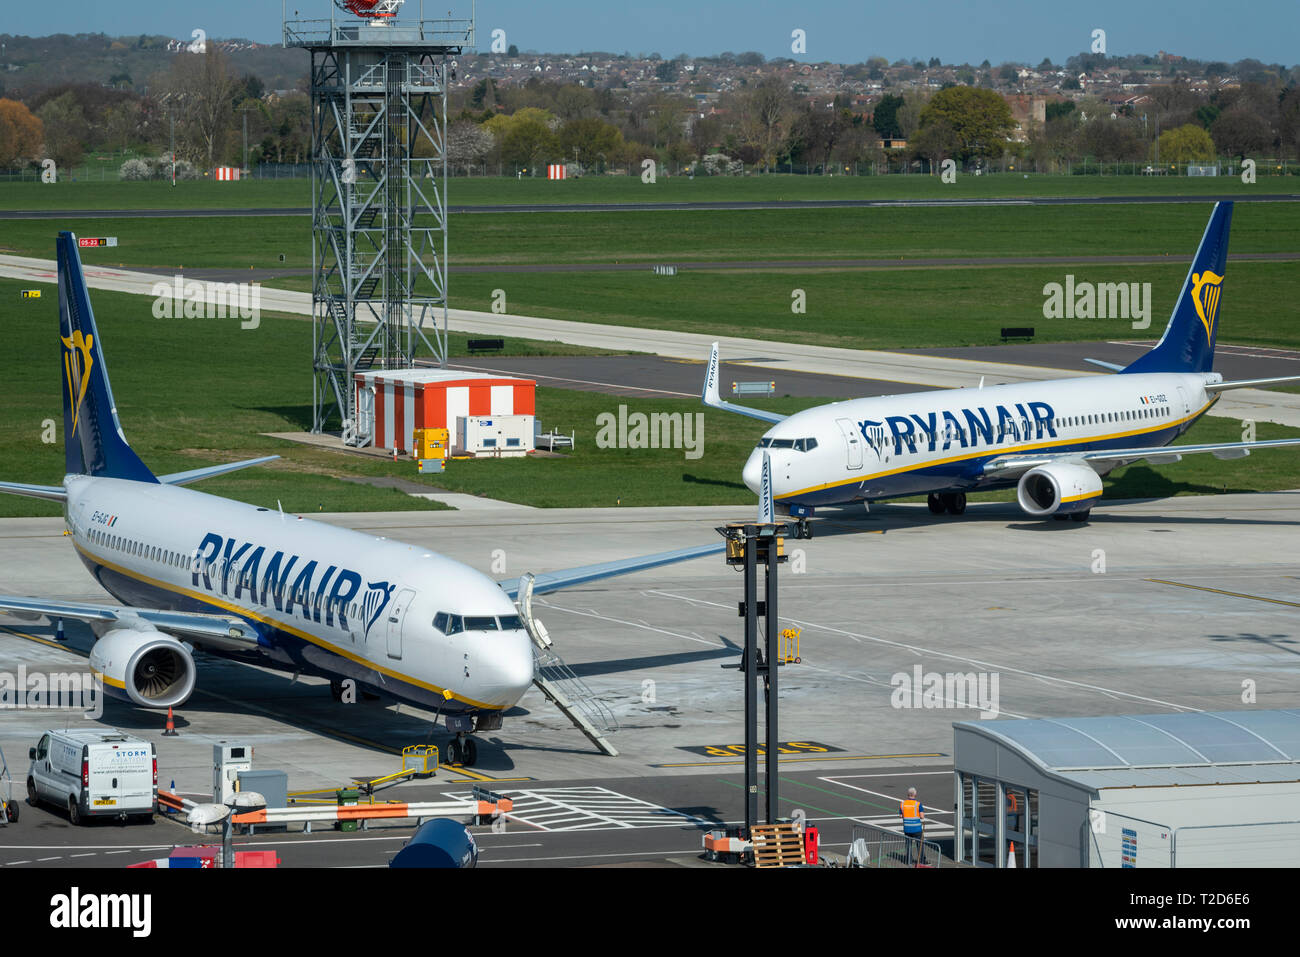 Ryanair jet airliner planes at London Southend Airport, Essex, UK. The first two Ryanair Boeing 737 aircraft positioning in to operate new routes Stock Photo